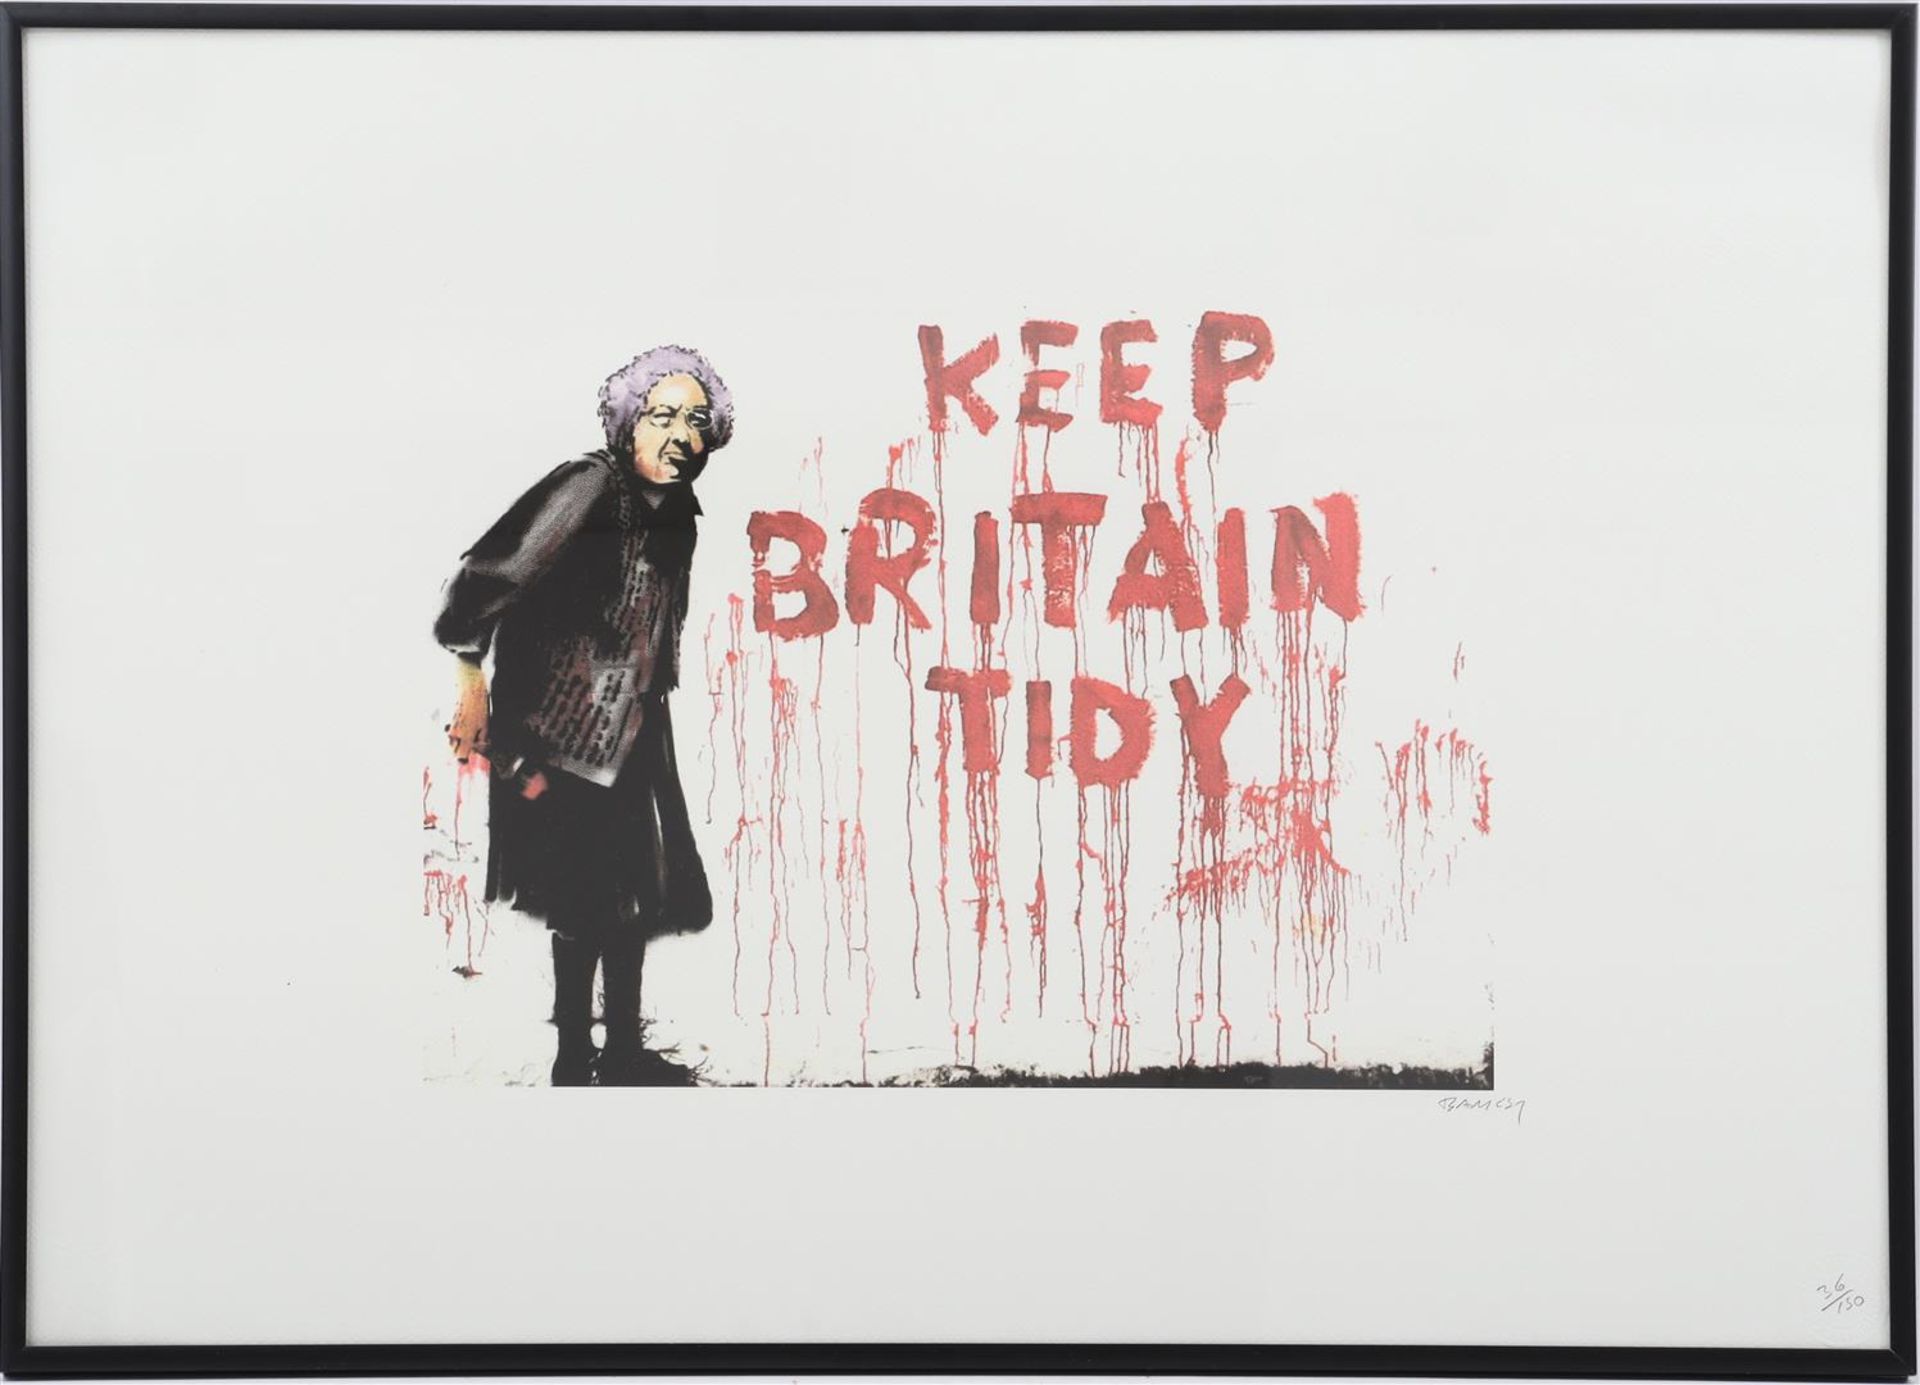 Graphic after Banksy